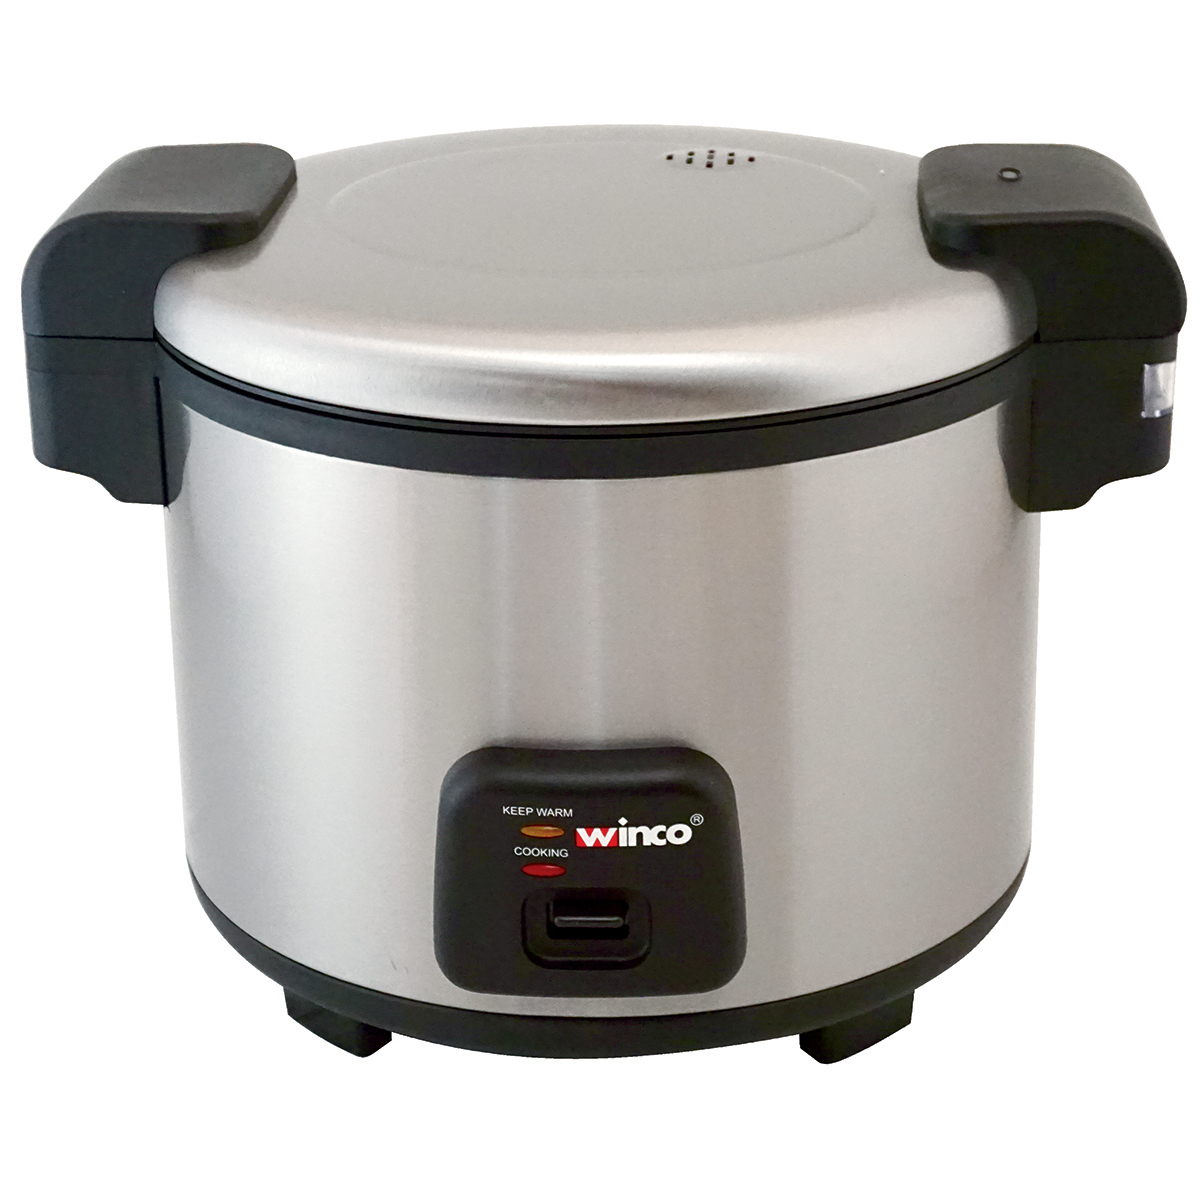 Winco Rc S300 30 Cup Electric Rice Cooker W Hinged Cover Stainless